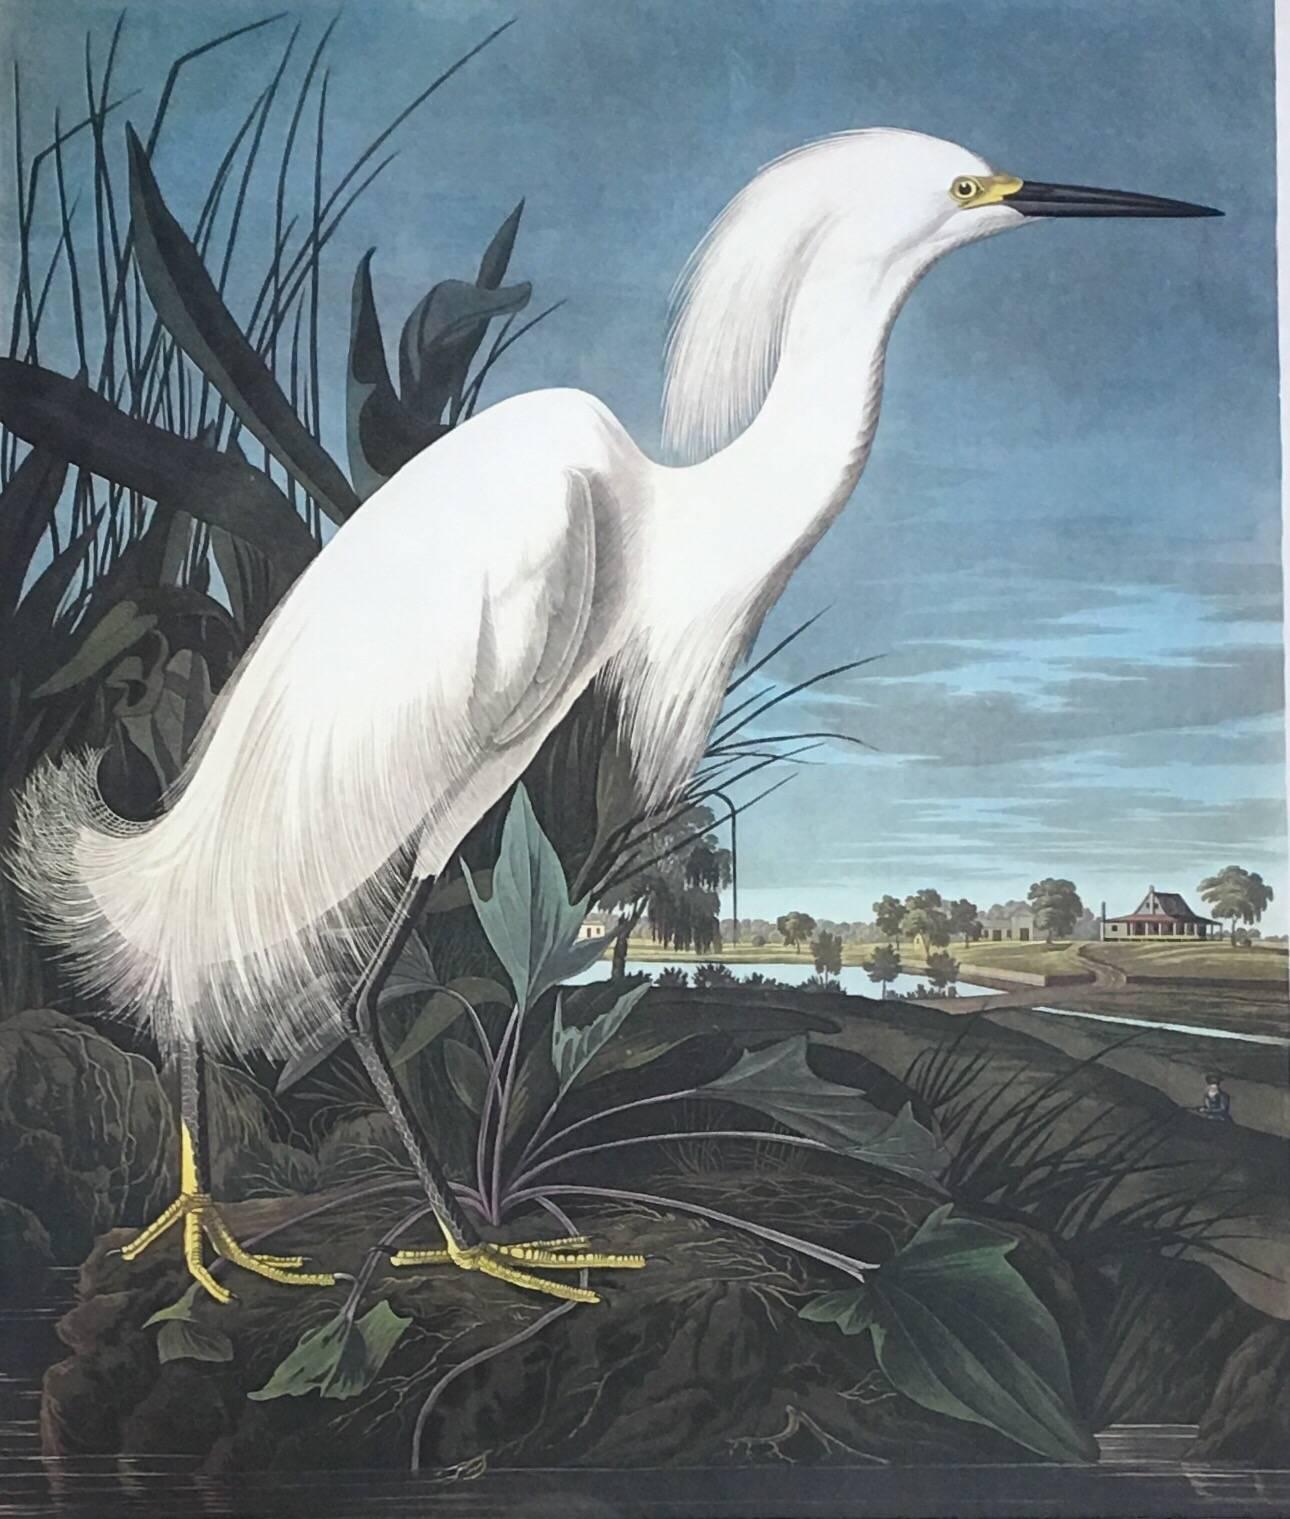 Large limited edition Heron or White Egret Bird Audubon fine art lithograph plate.  This Princeton Edition is printed on heavy acid-free museum quality paper.  It is hand numbered 375 out of 1500 prints and features an embossed seal in the lower